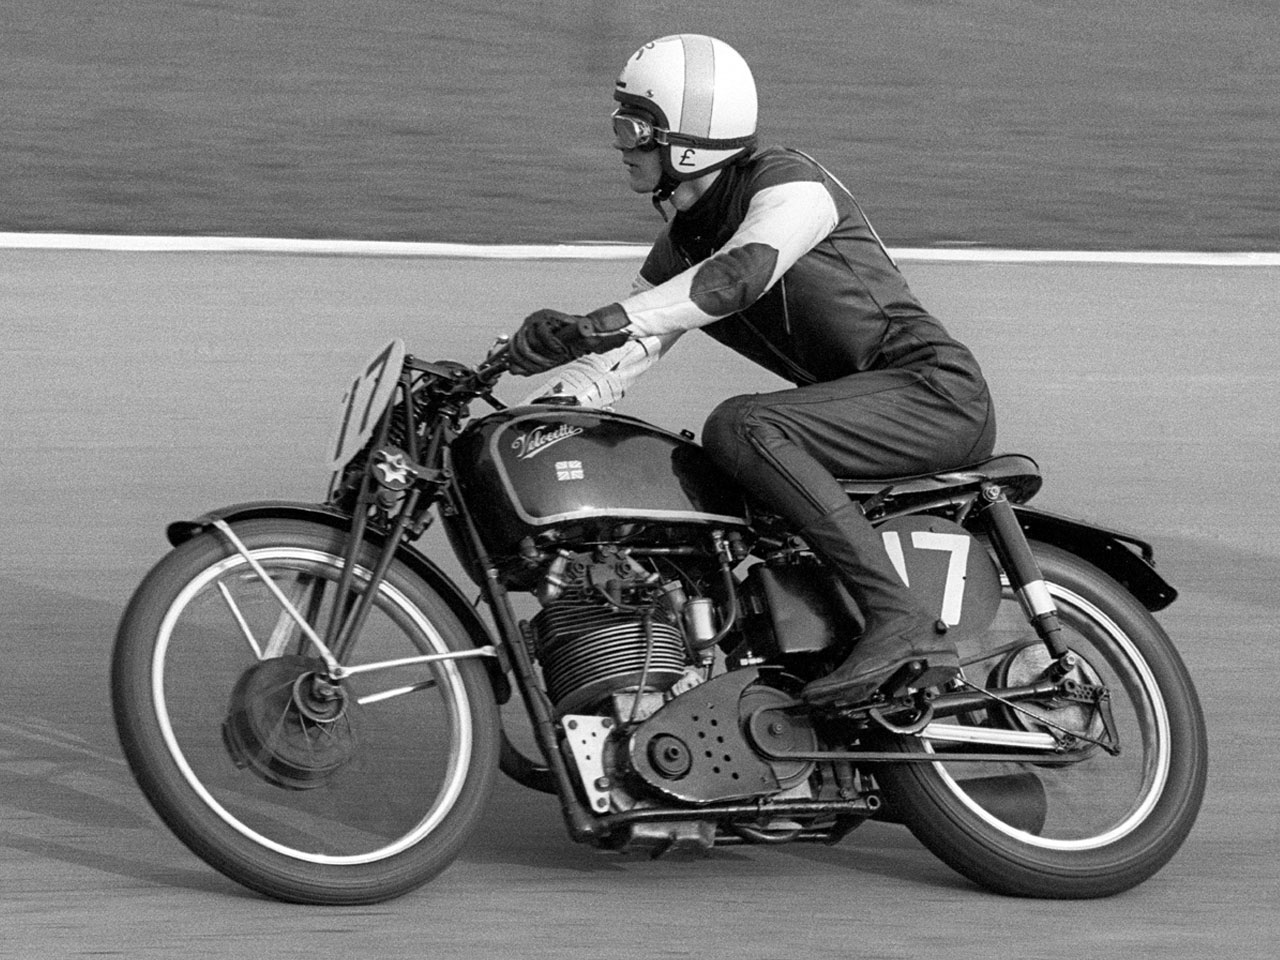 motorcycle velocette racer free photo